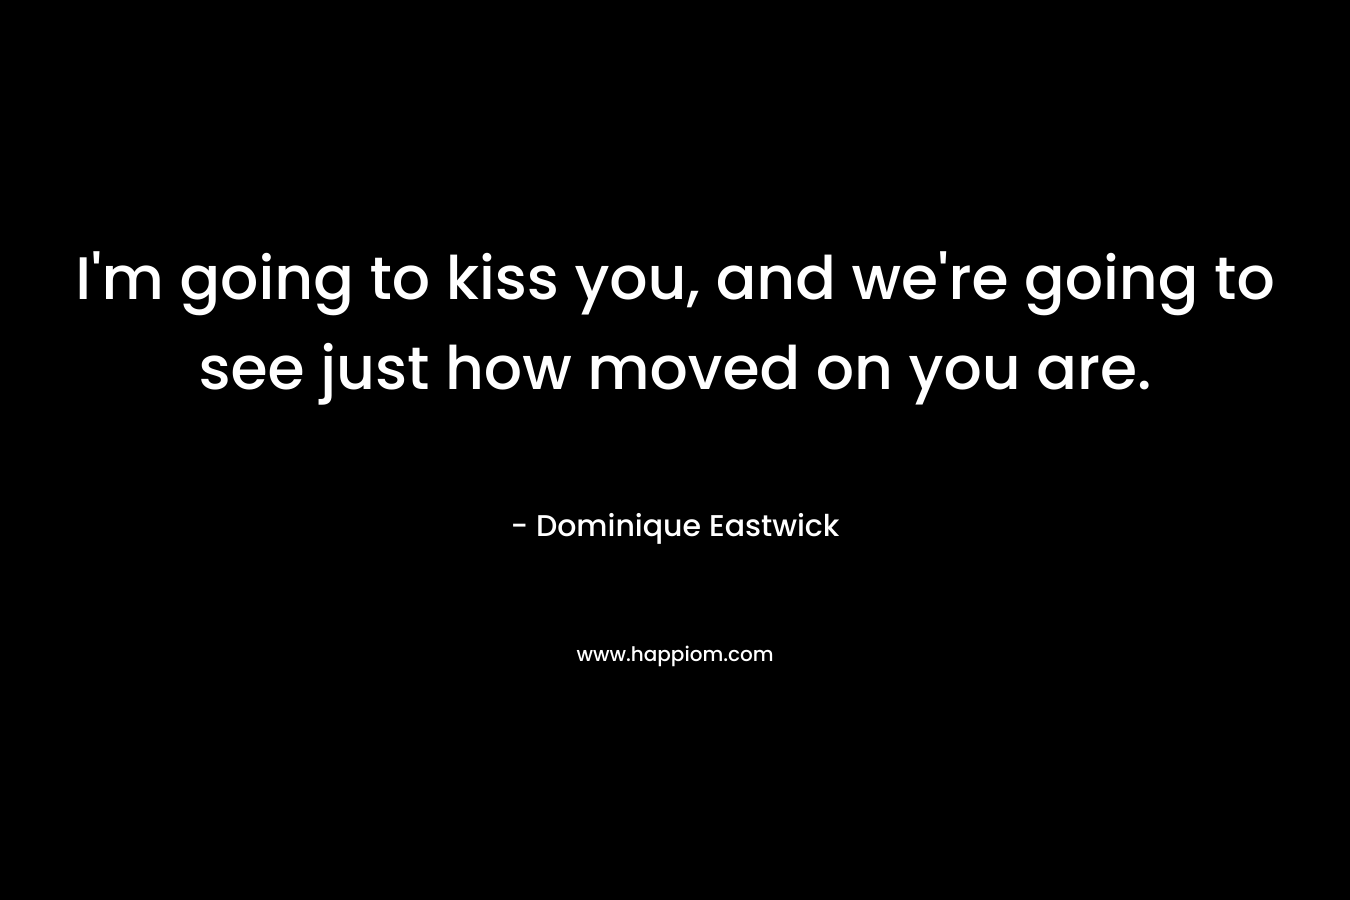 I’m going to kiss you, and we’re going to see just how moved on you are. – Dominique Eastwick